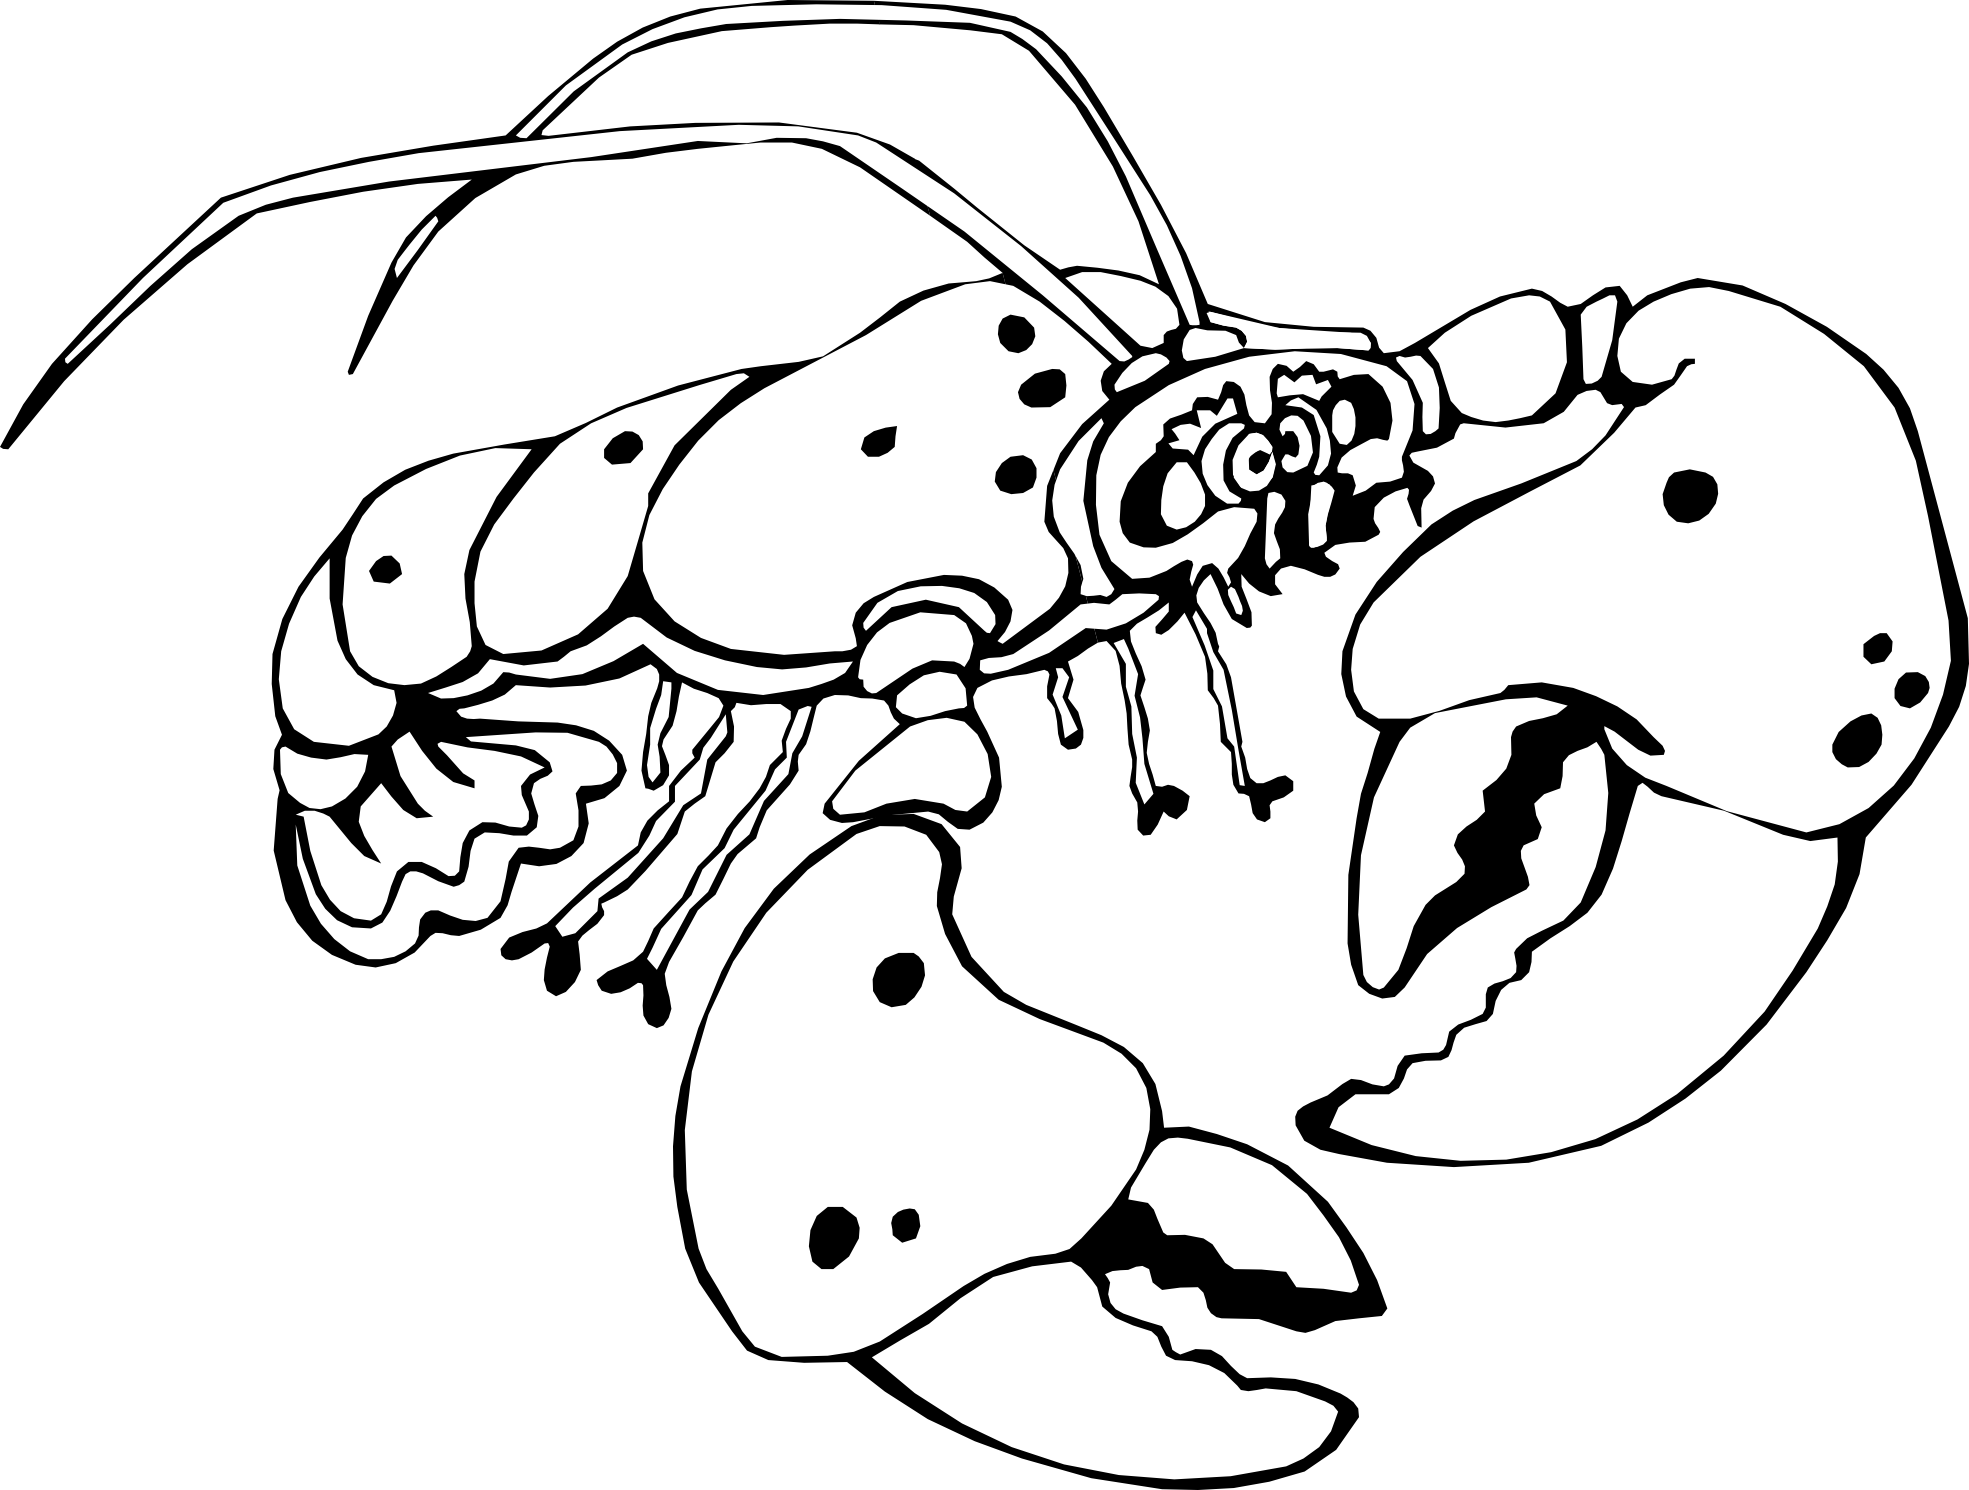 Lobster Clipart Black And White - Lobster Black And White, Transparent background PNG HD thumbnail